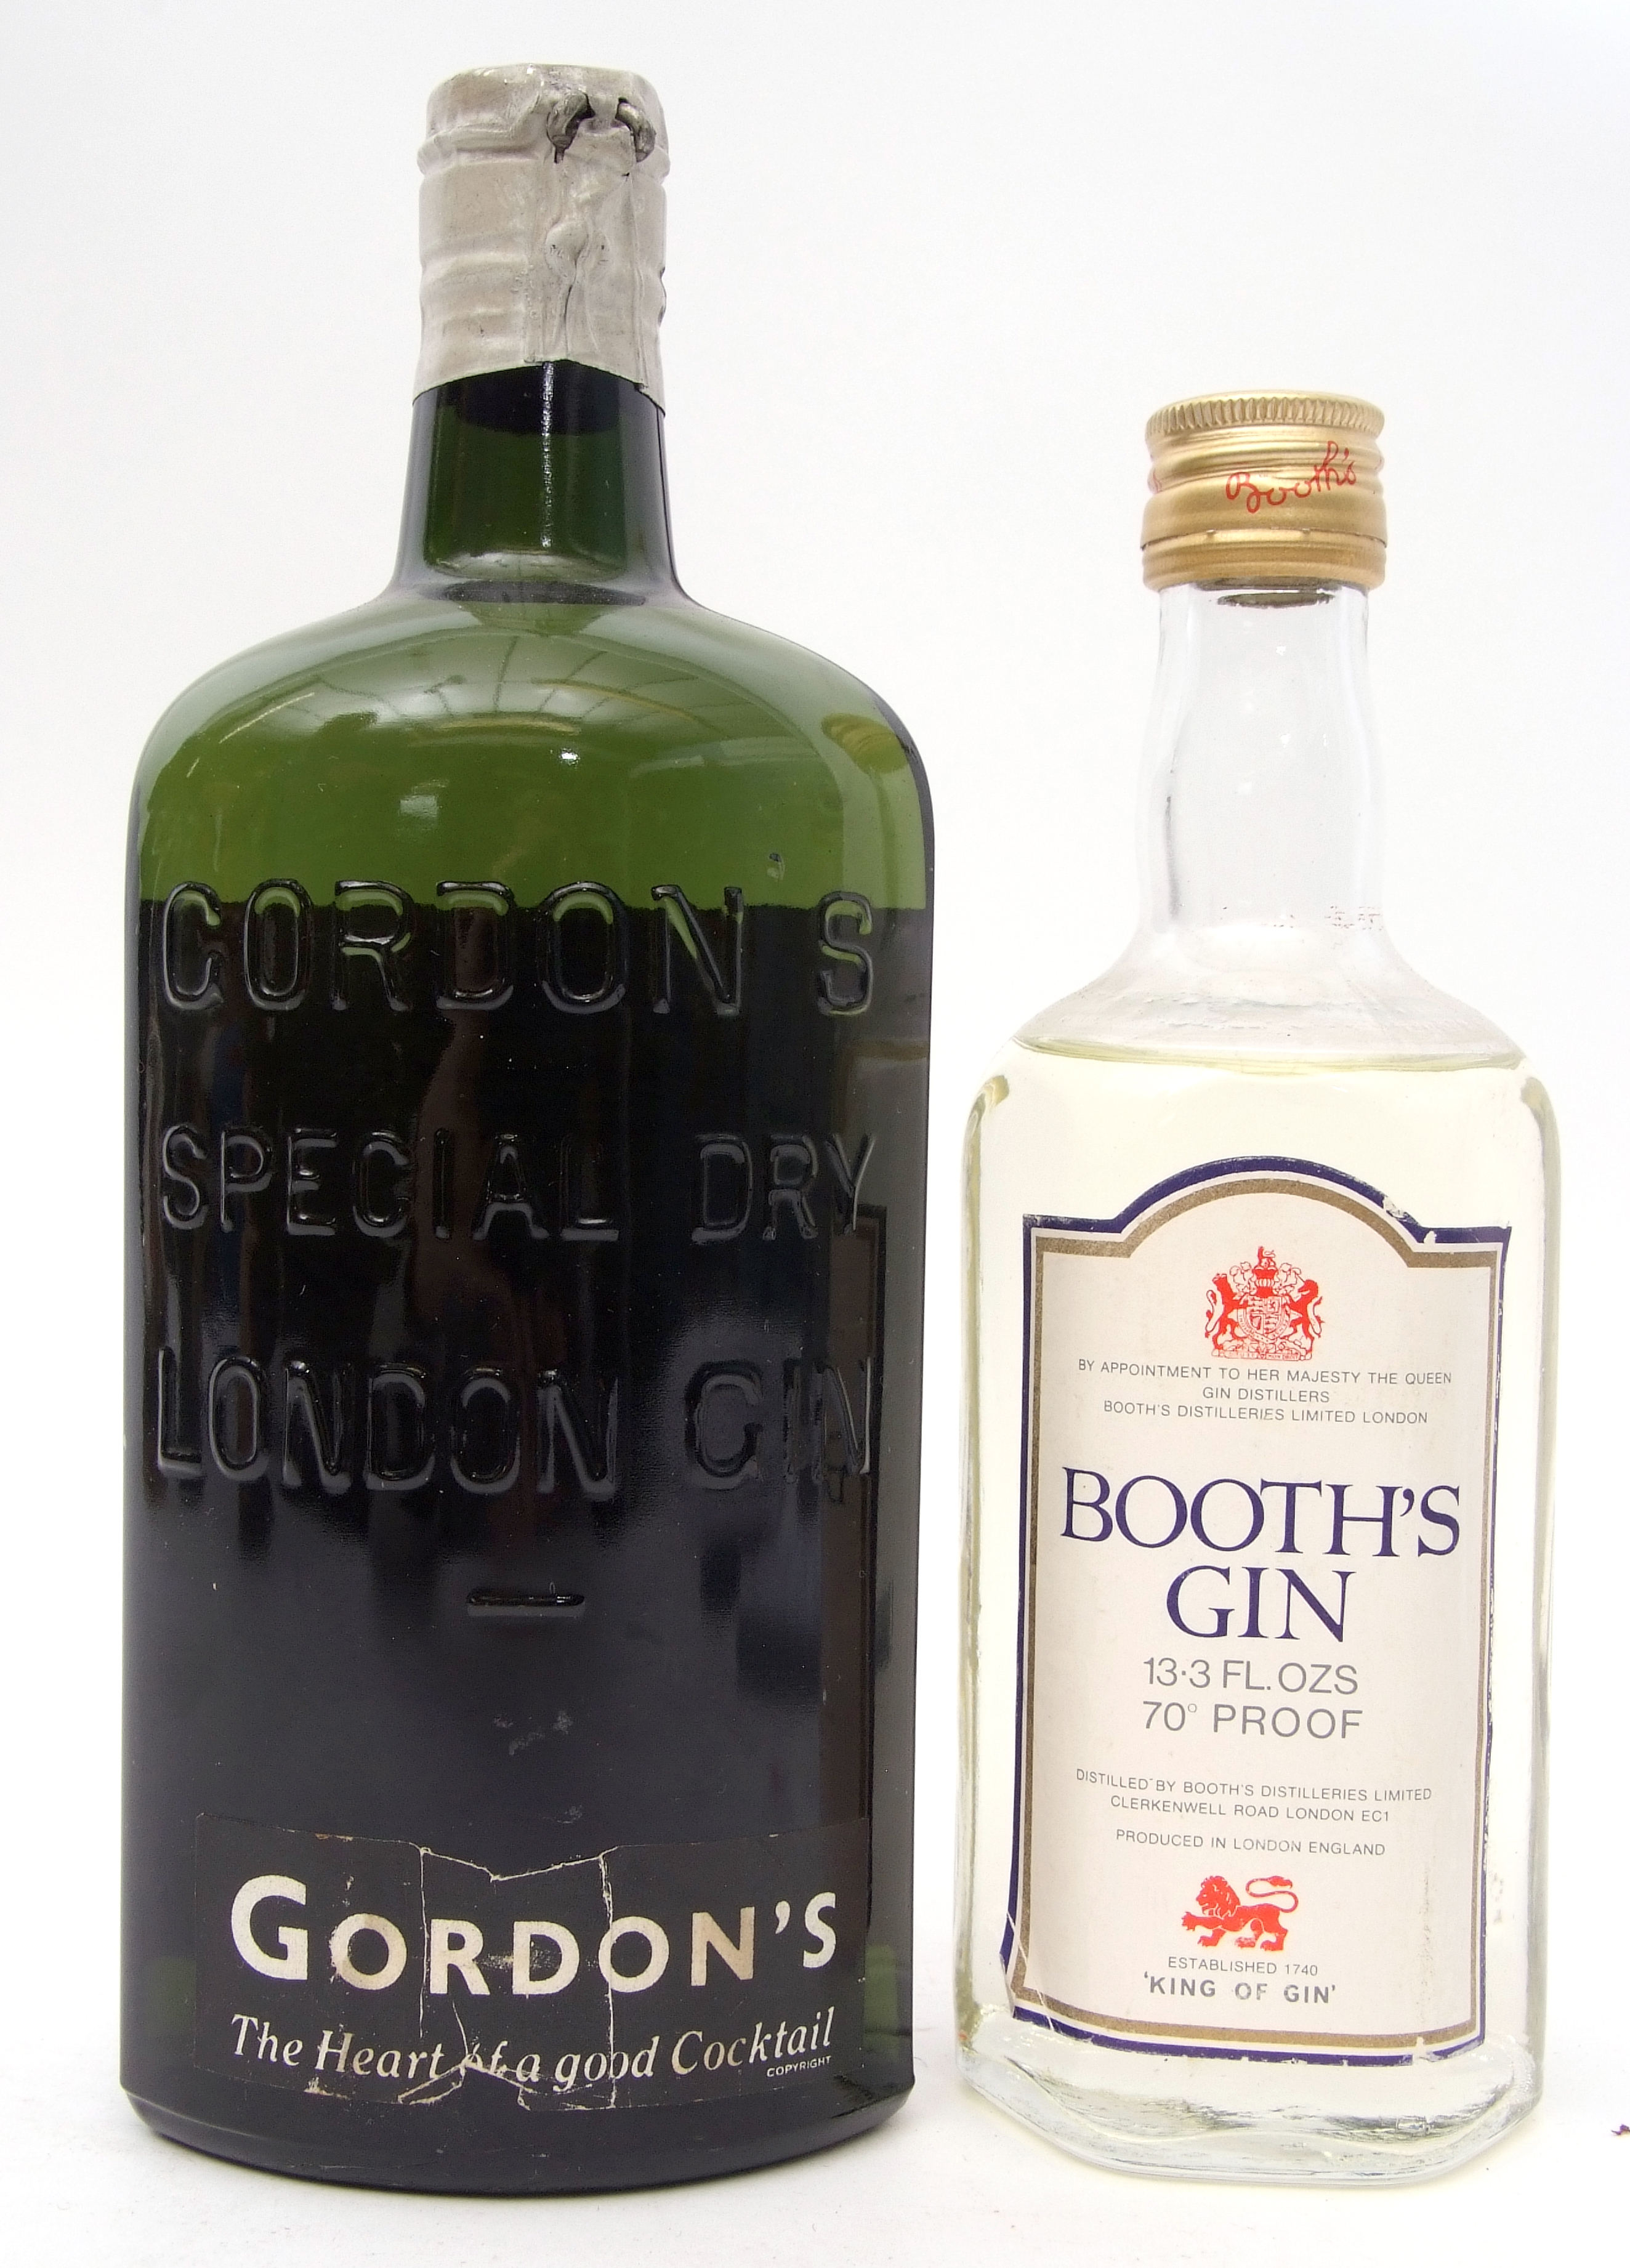 Vintage bottle of Gordon's Special Dry London Gin, 70% proof and further small bottle of Booth's